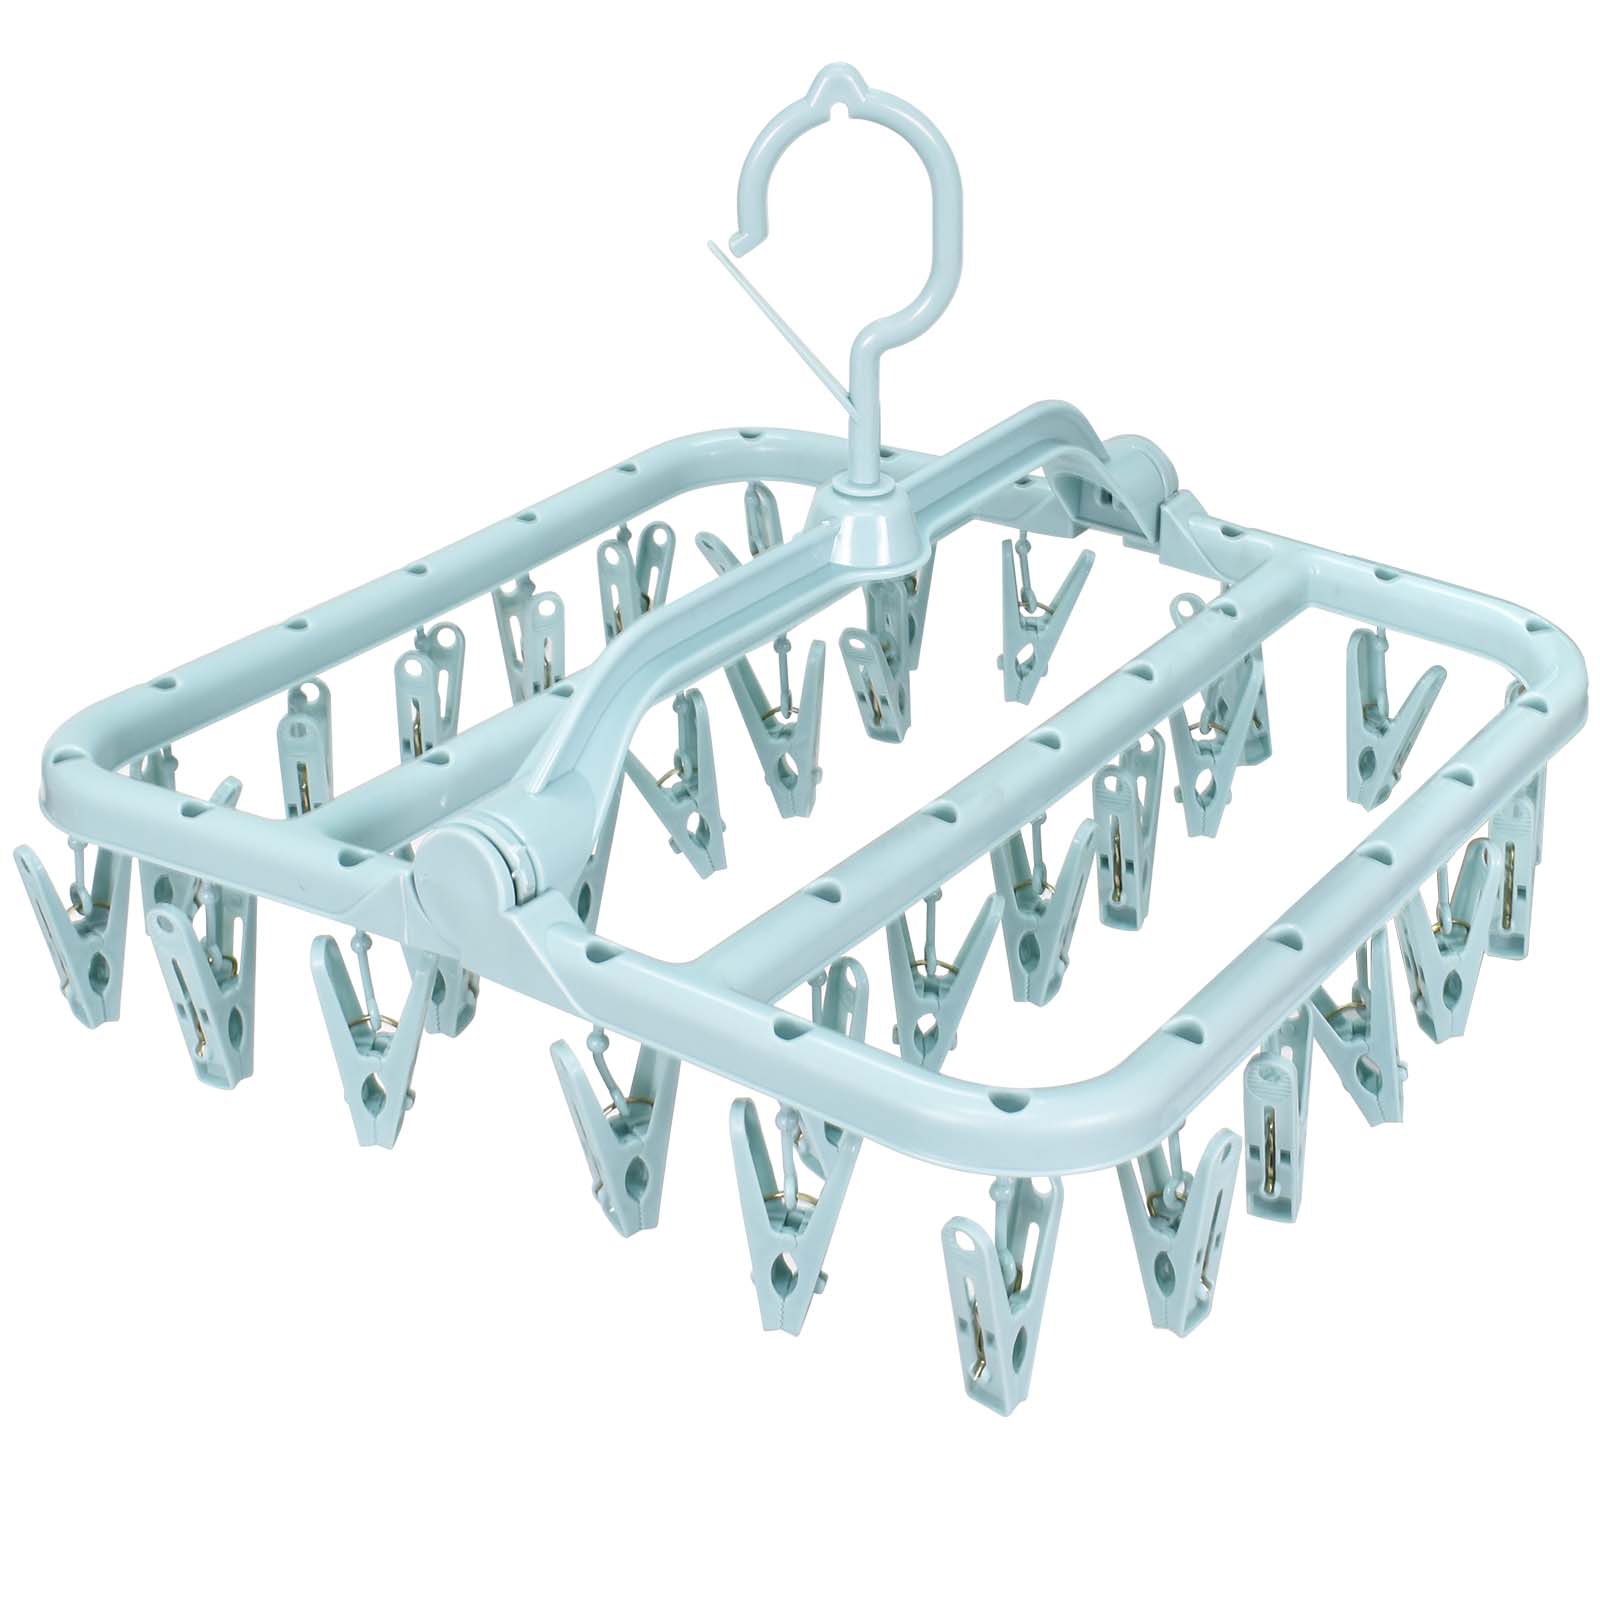 Plastic Sock Clips Drying Rack Plastic Clothes Drying Rack Portable Drying  Rack 10 Clips Drying Rack Drying Supplies Plastic Sock Clips Drying Rack  Straight Rod For Clothes Travel 